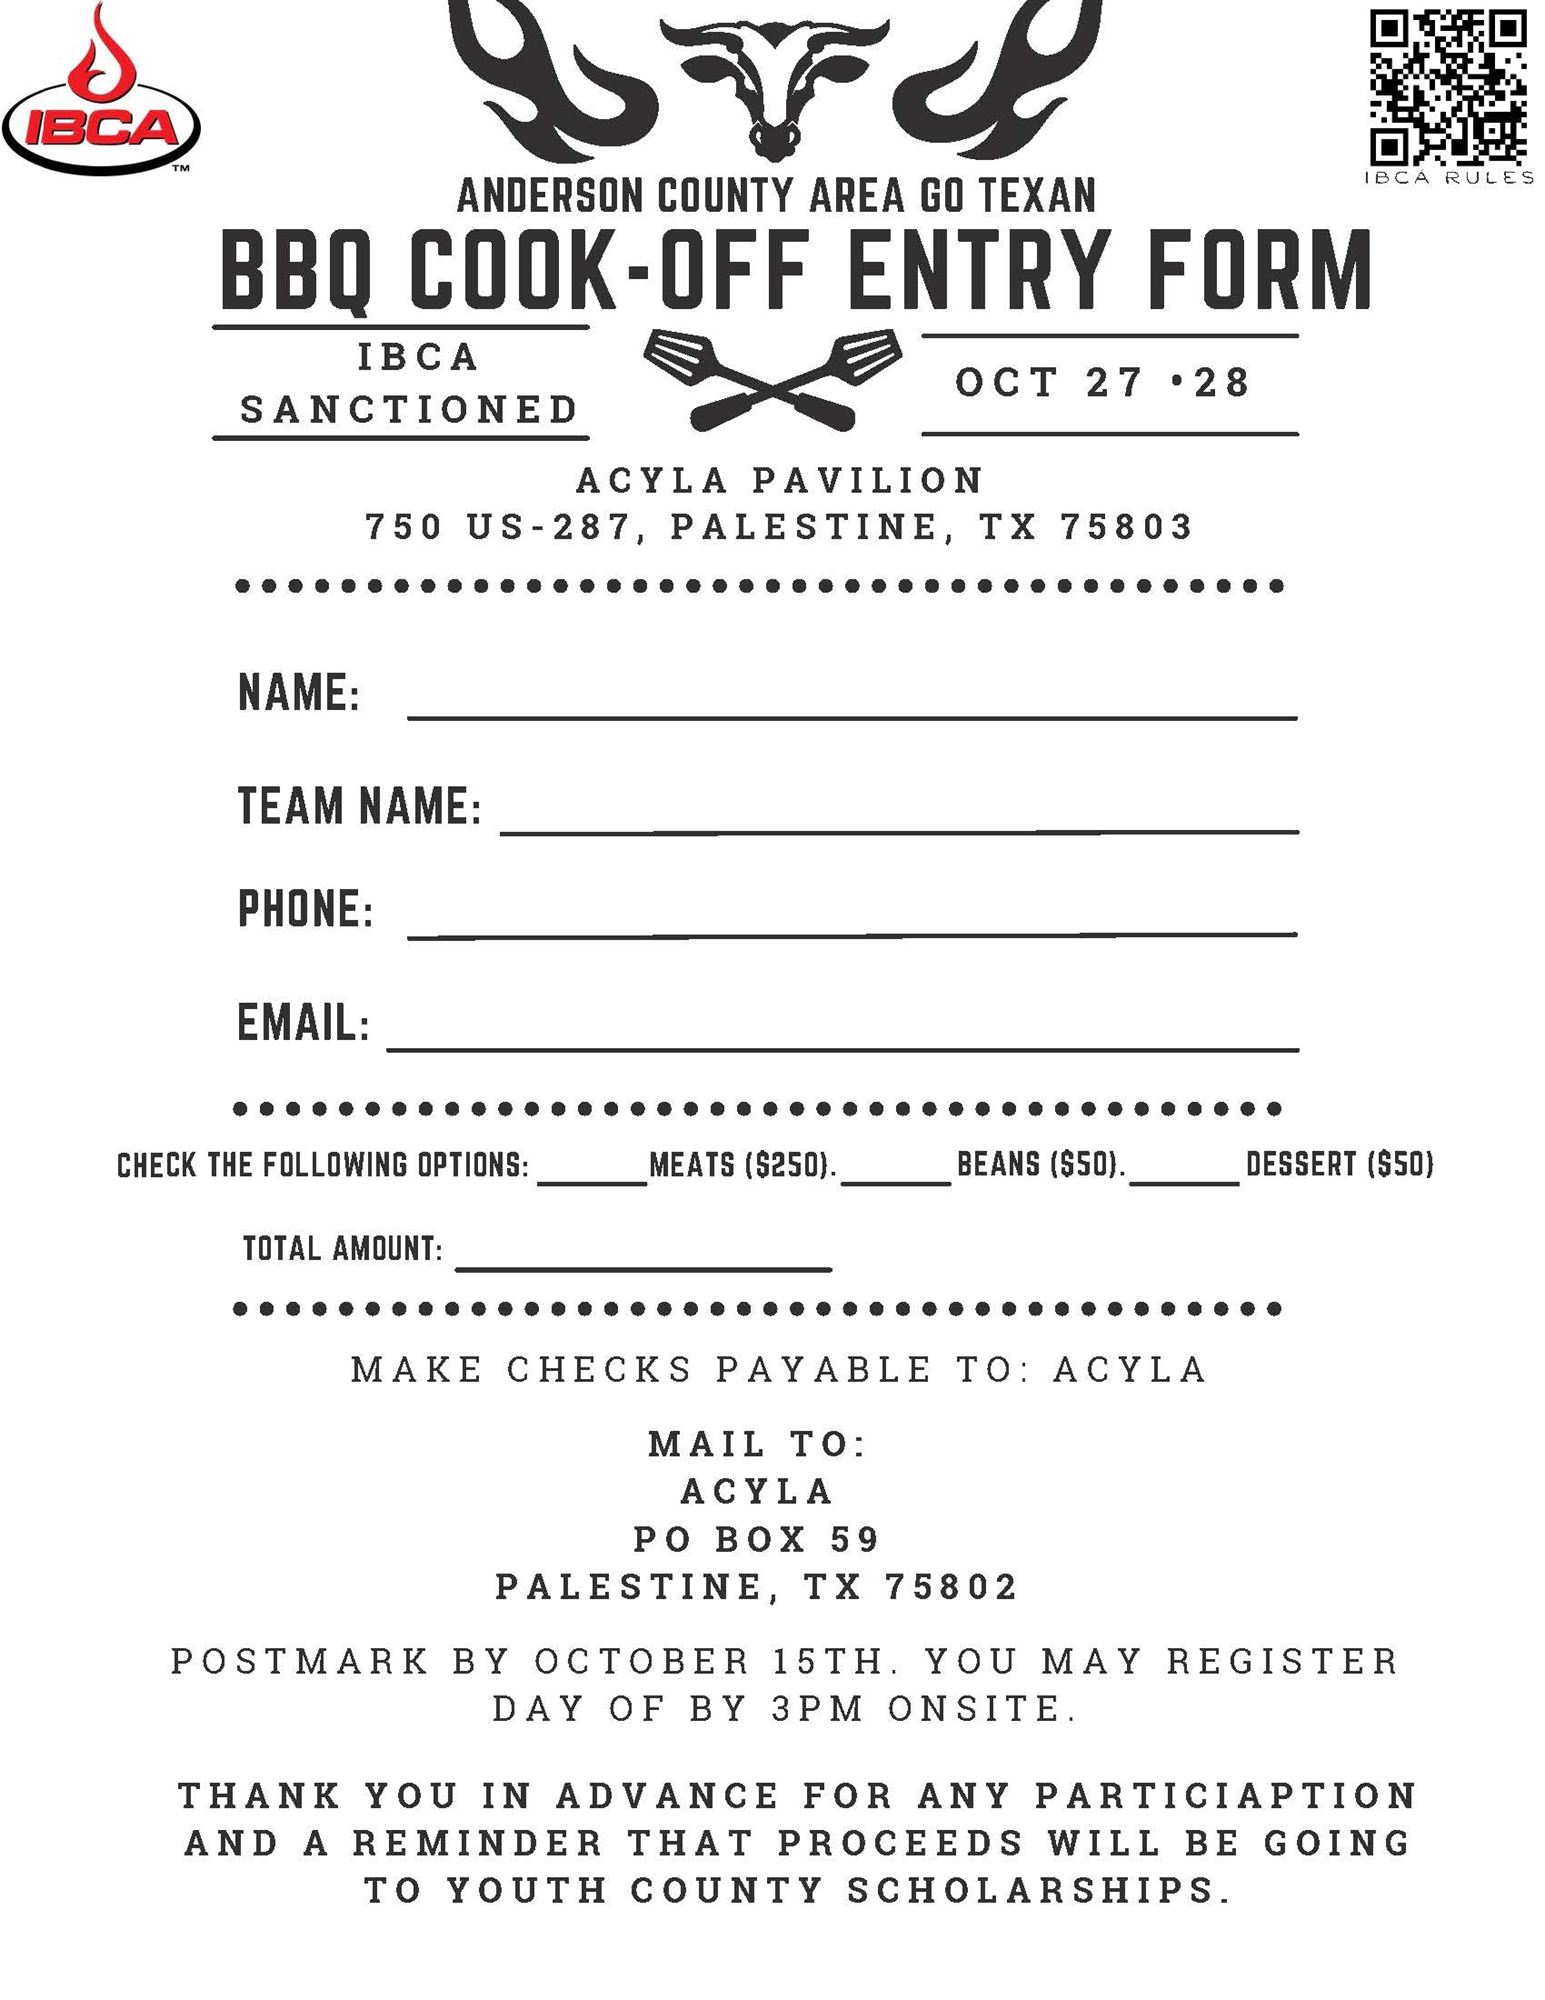 ANDERSON COUNTY AREA GO TEXAN BBQ COOKOFF